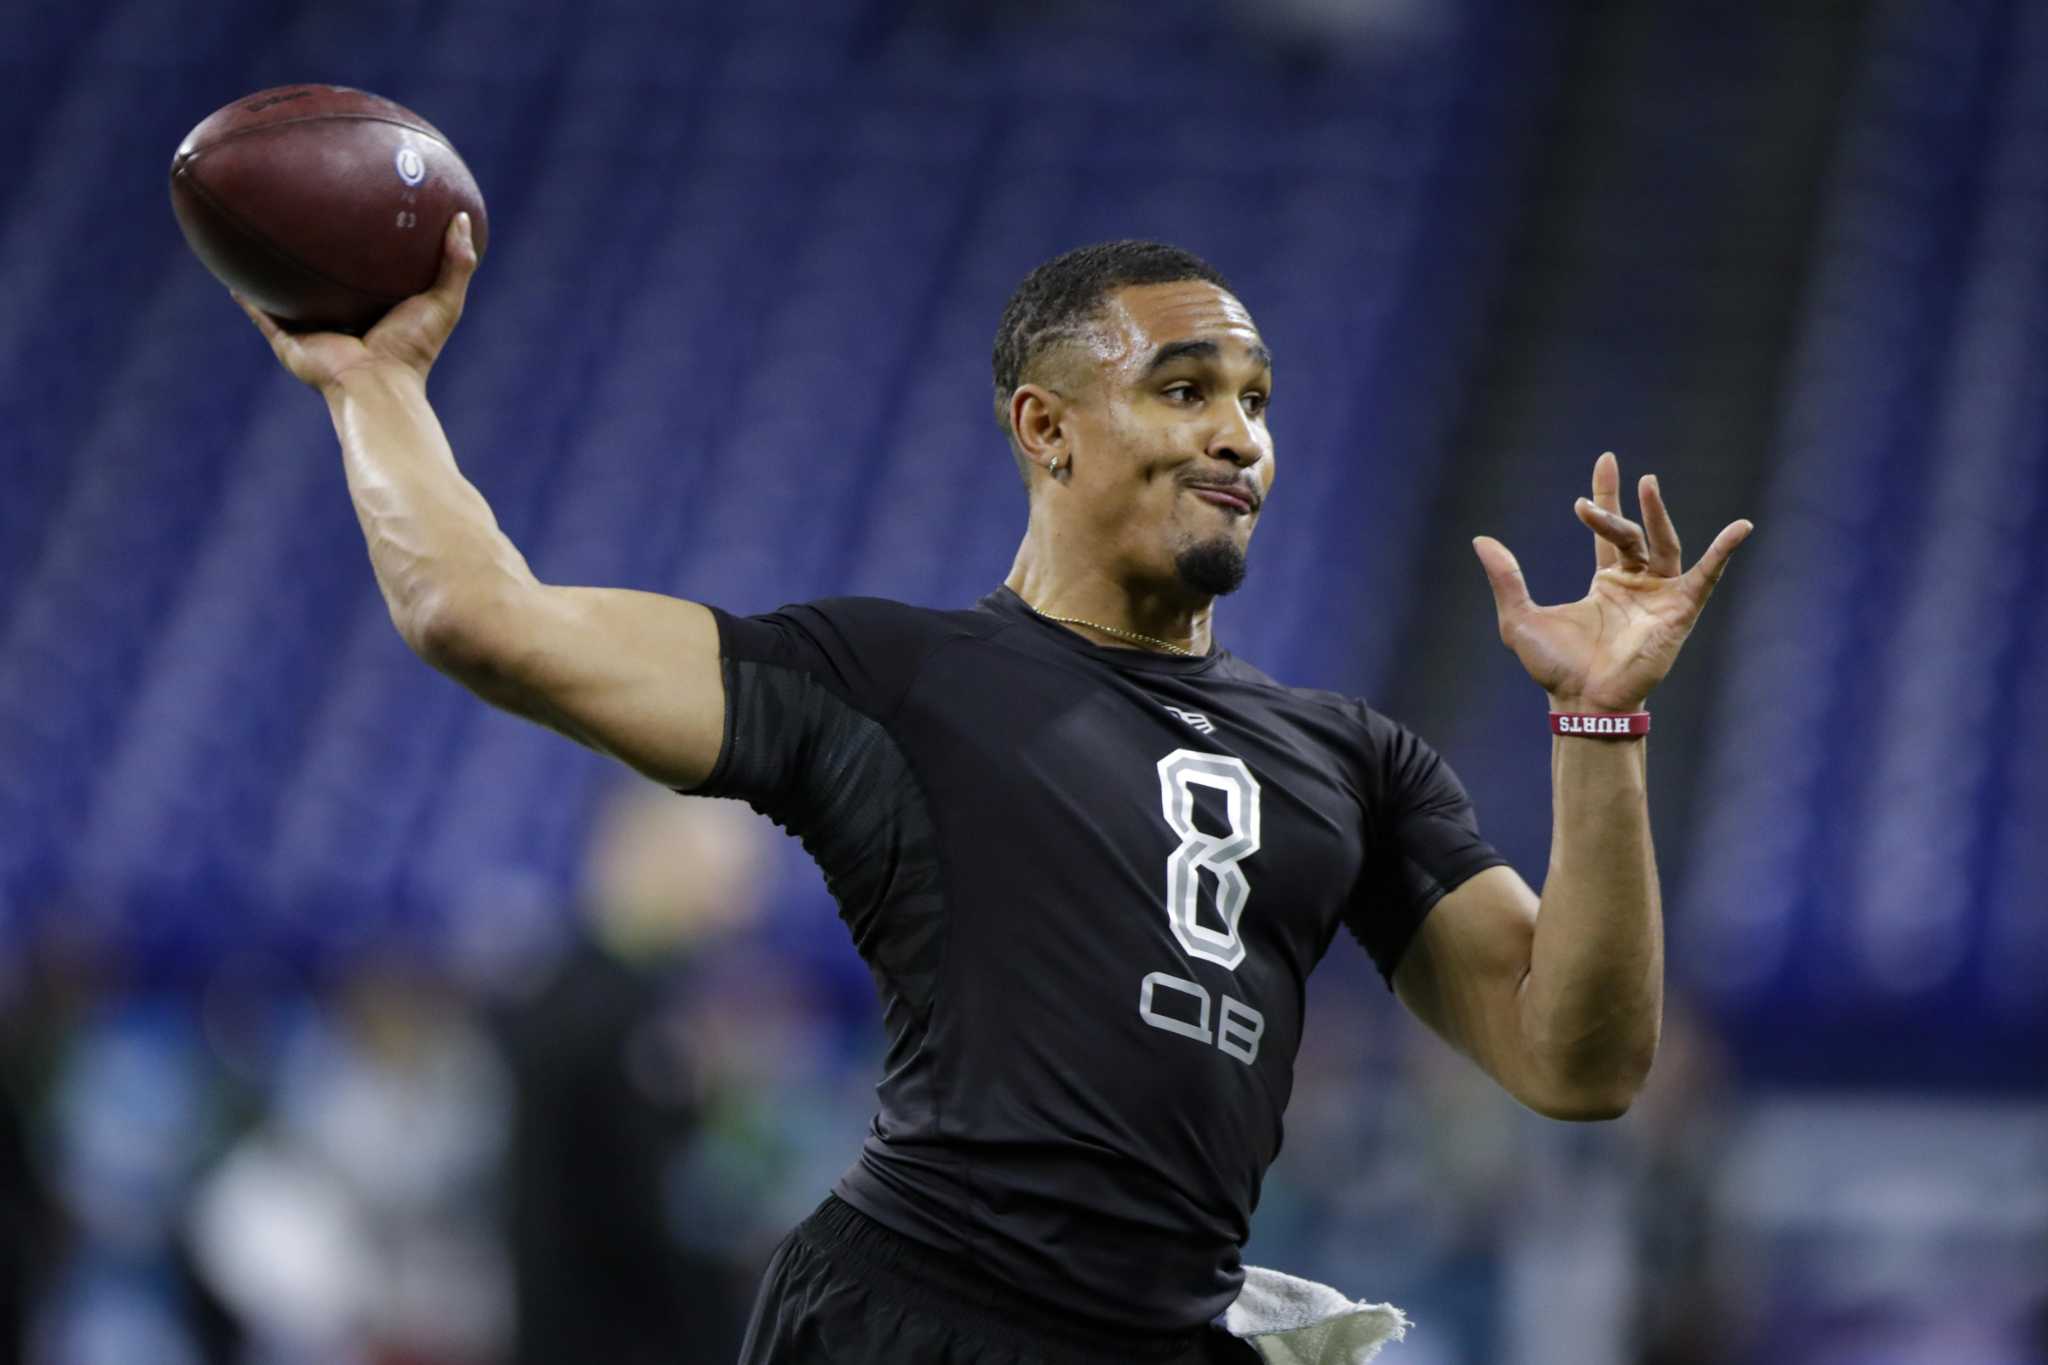 Adaptability in college prepares QB Jalen Hurts for pros